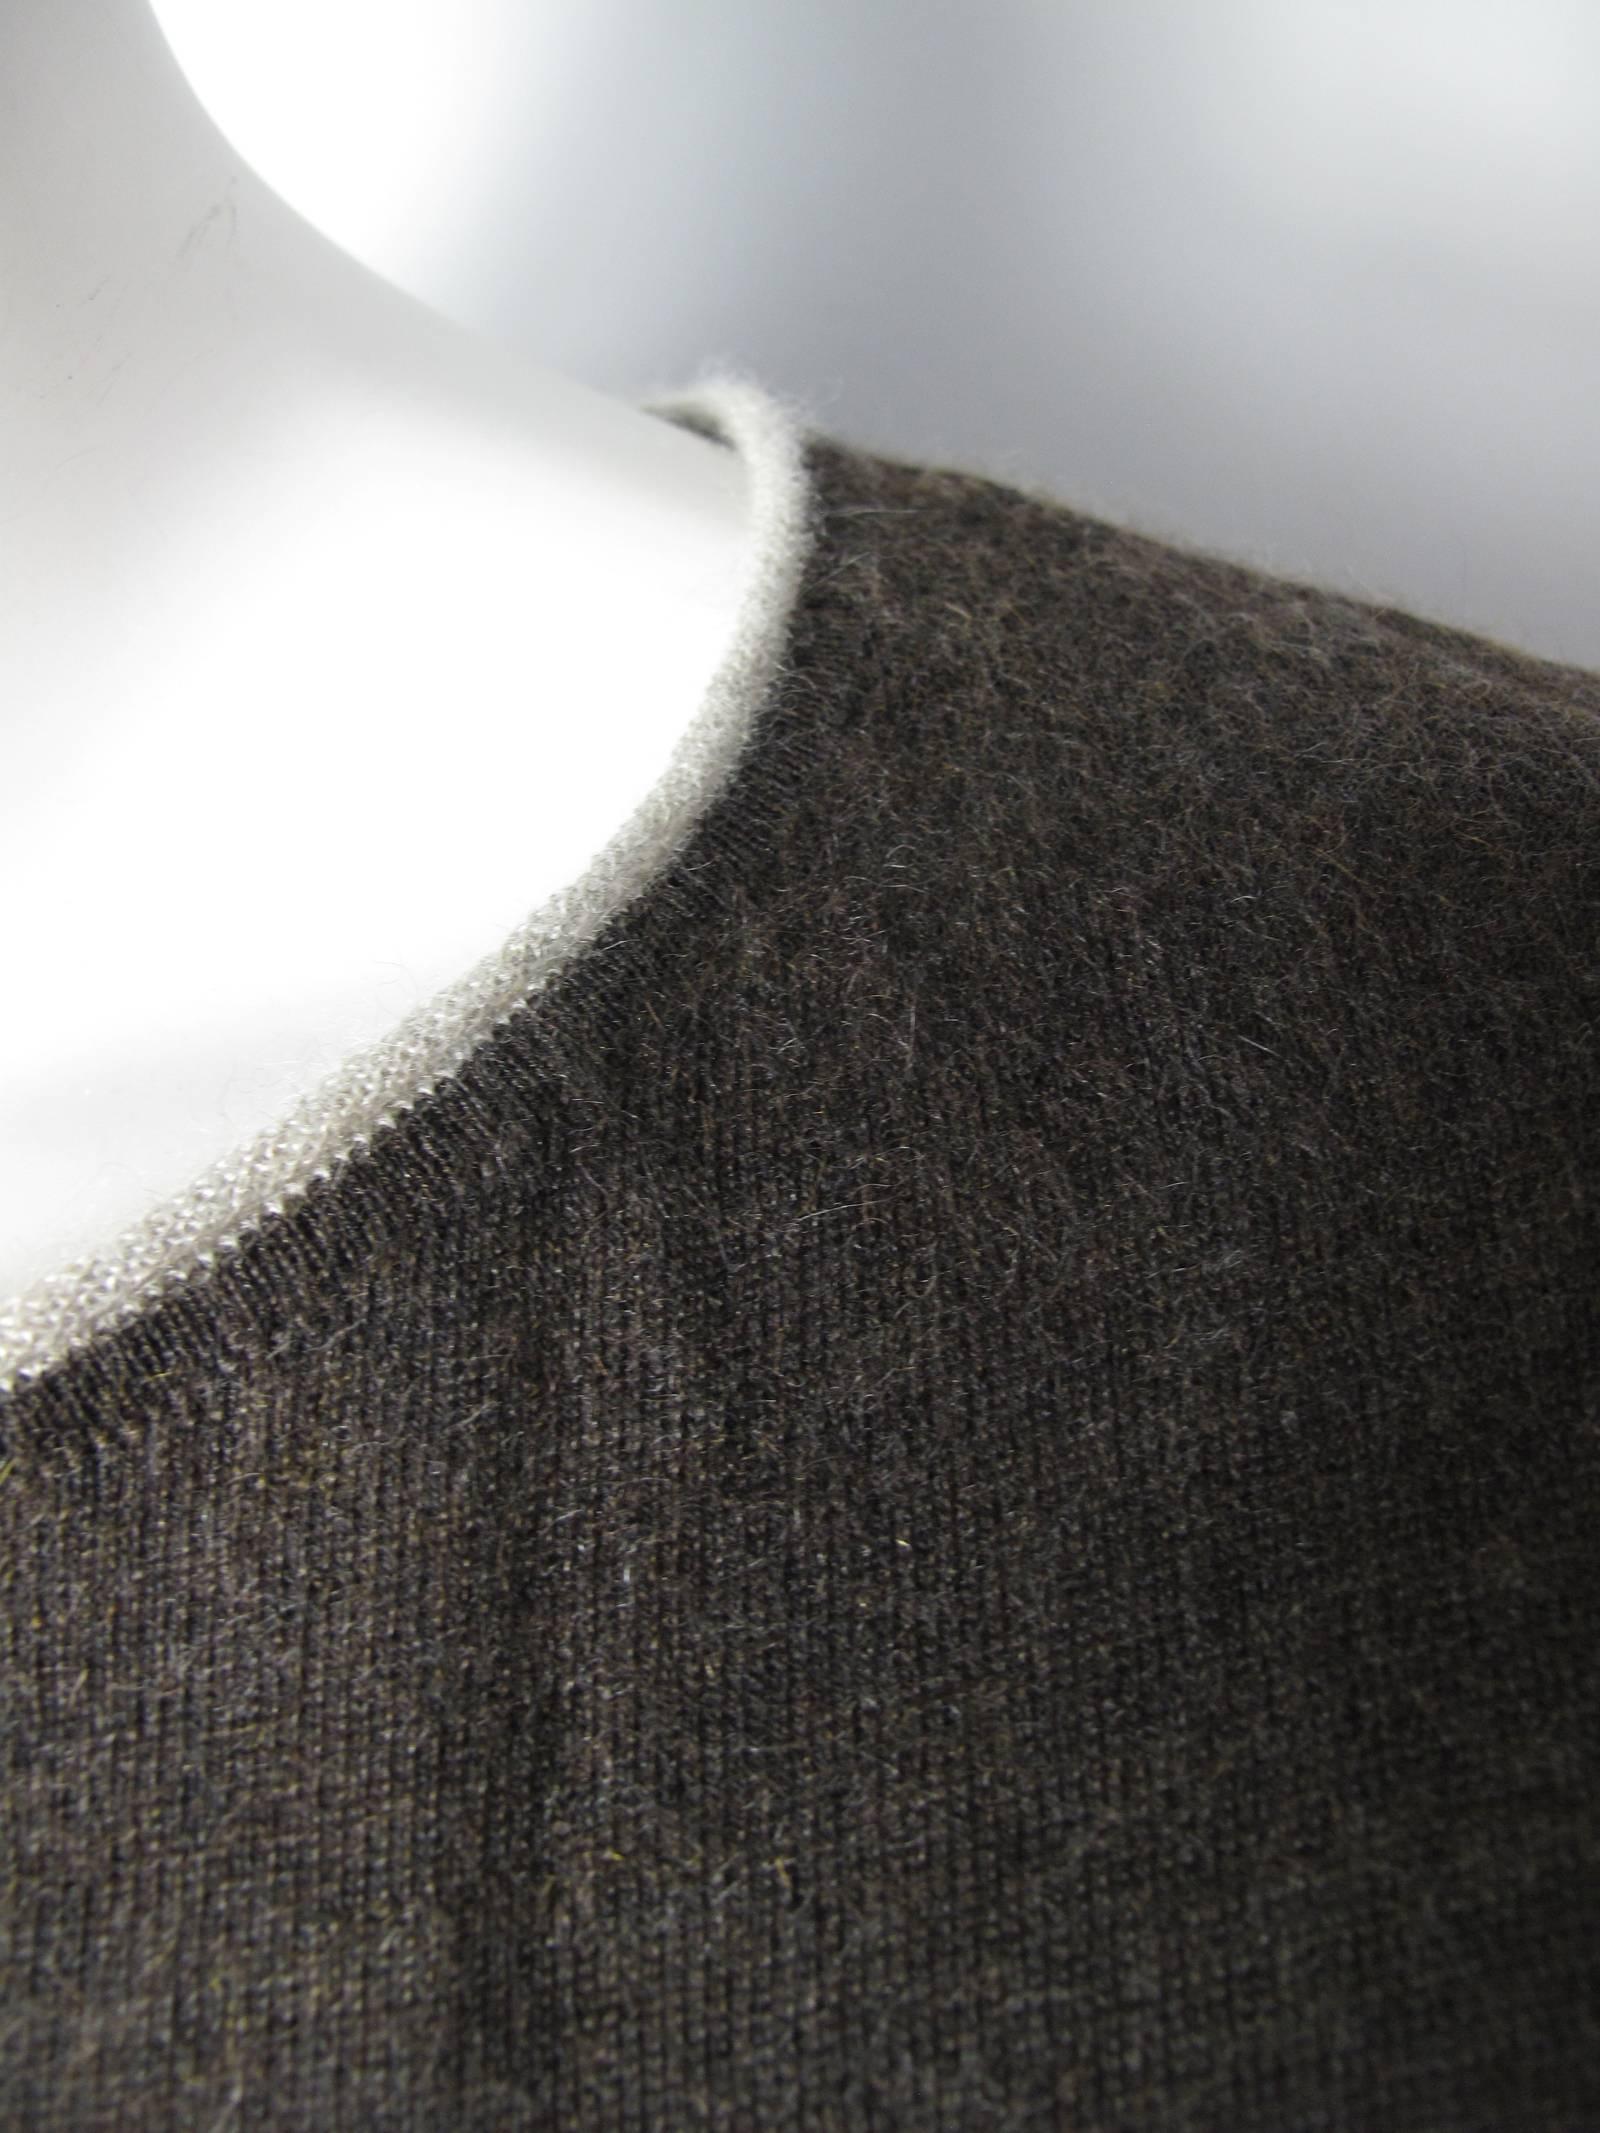 Gray Chanel Cashmere/Silk Brown Sweater with Grey Piping at Neck and Cuffs